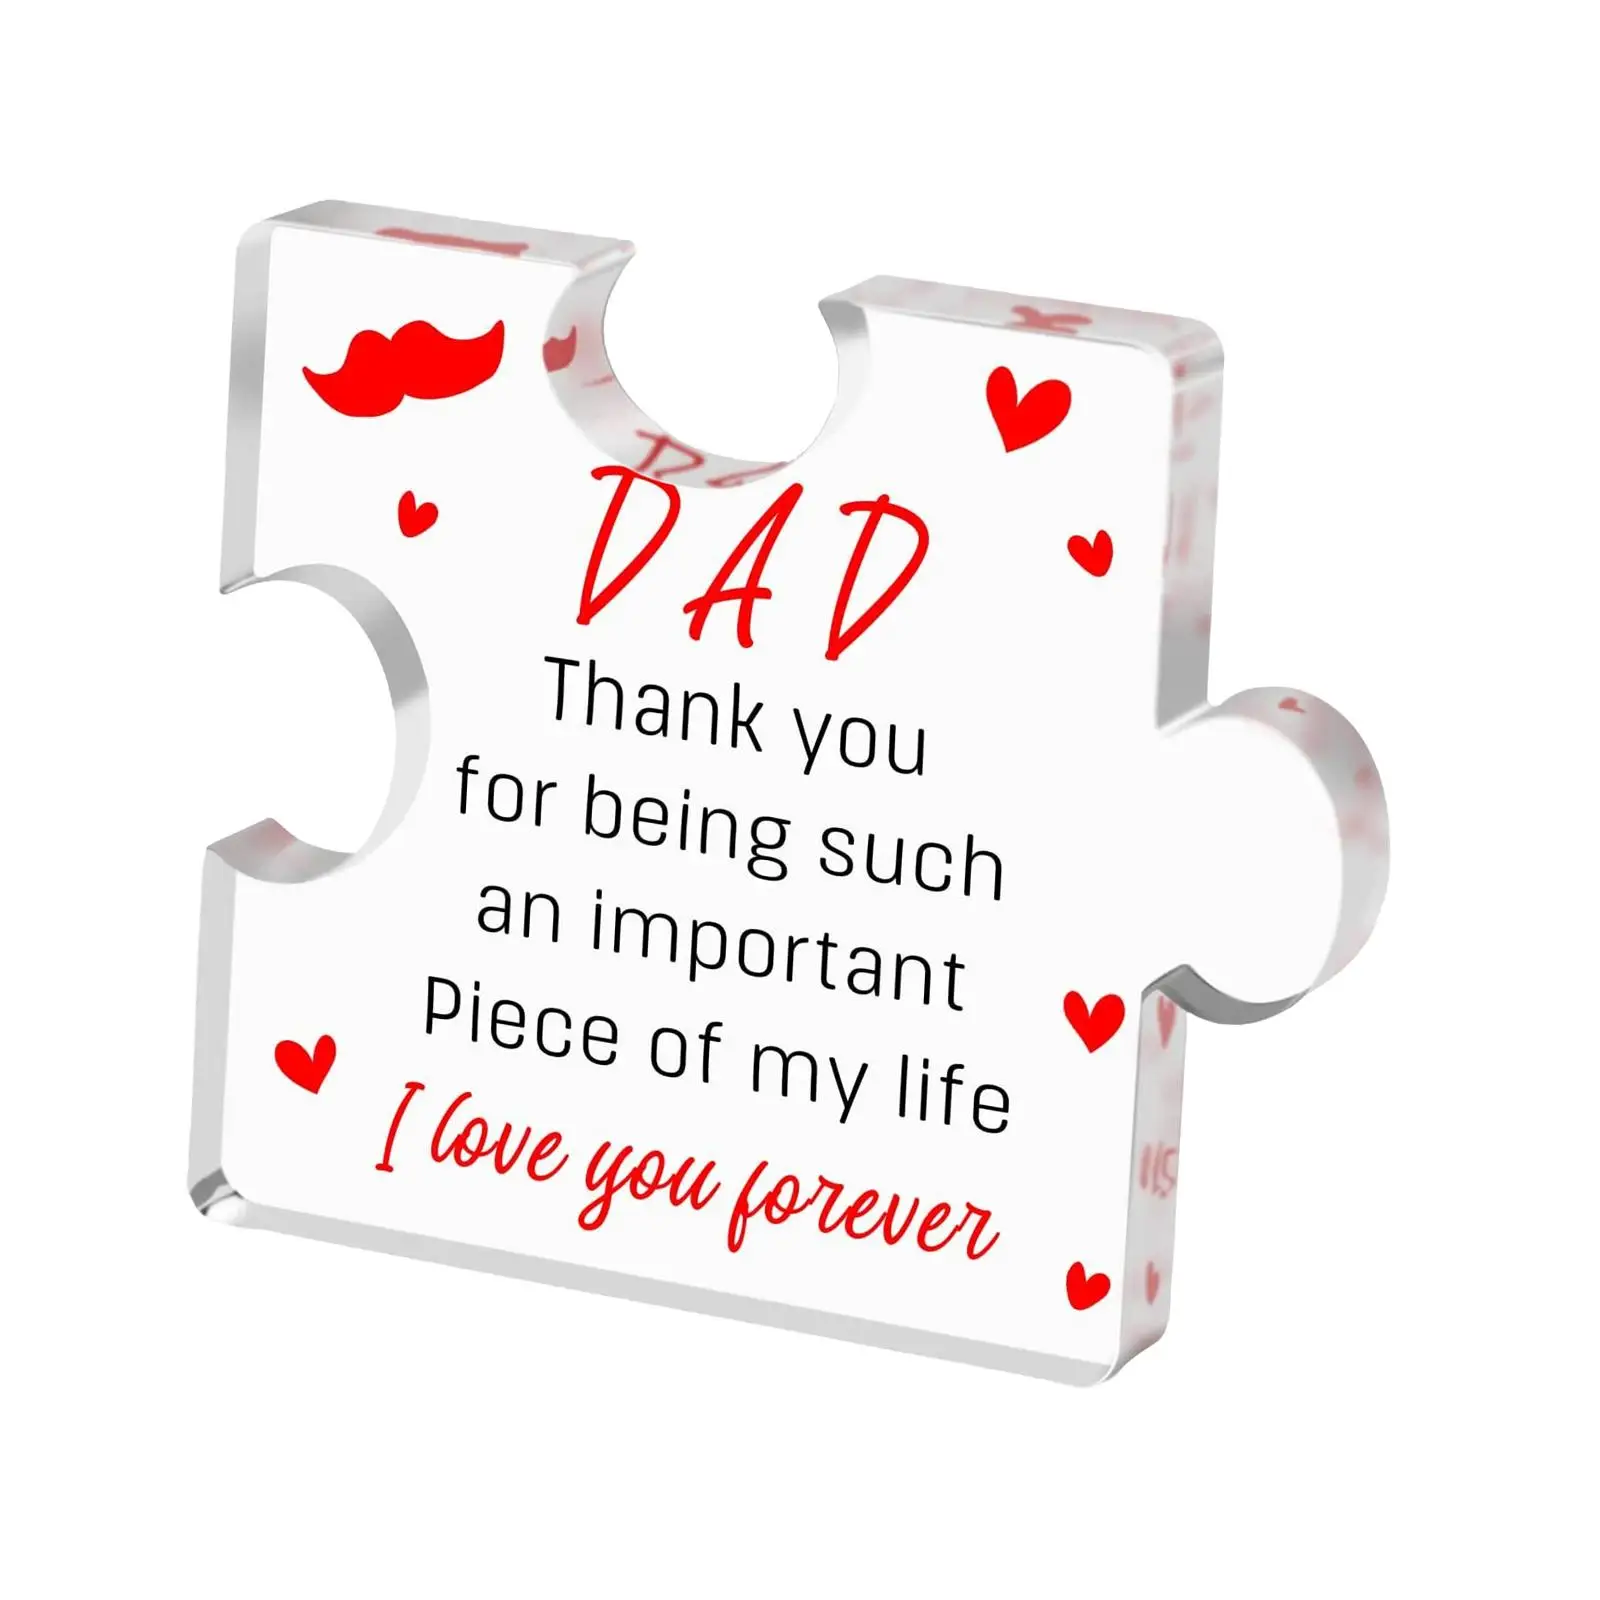 Acrylic Block Puzzle Desk Decorations Plaque My Man Gifts Fathers Day Present Birthday Gifts for Papa from Son and Daughter